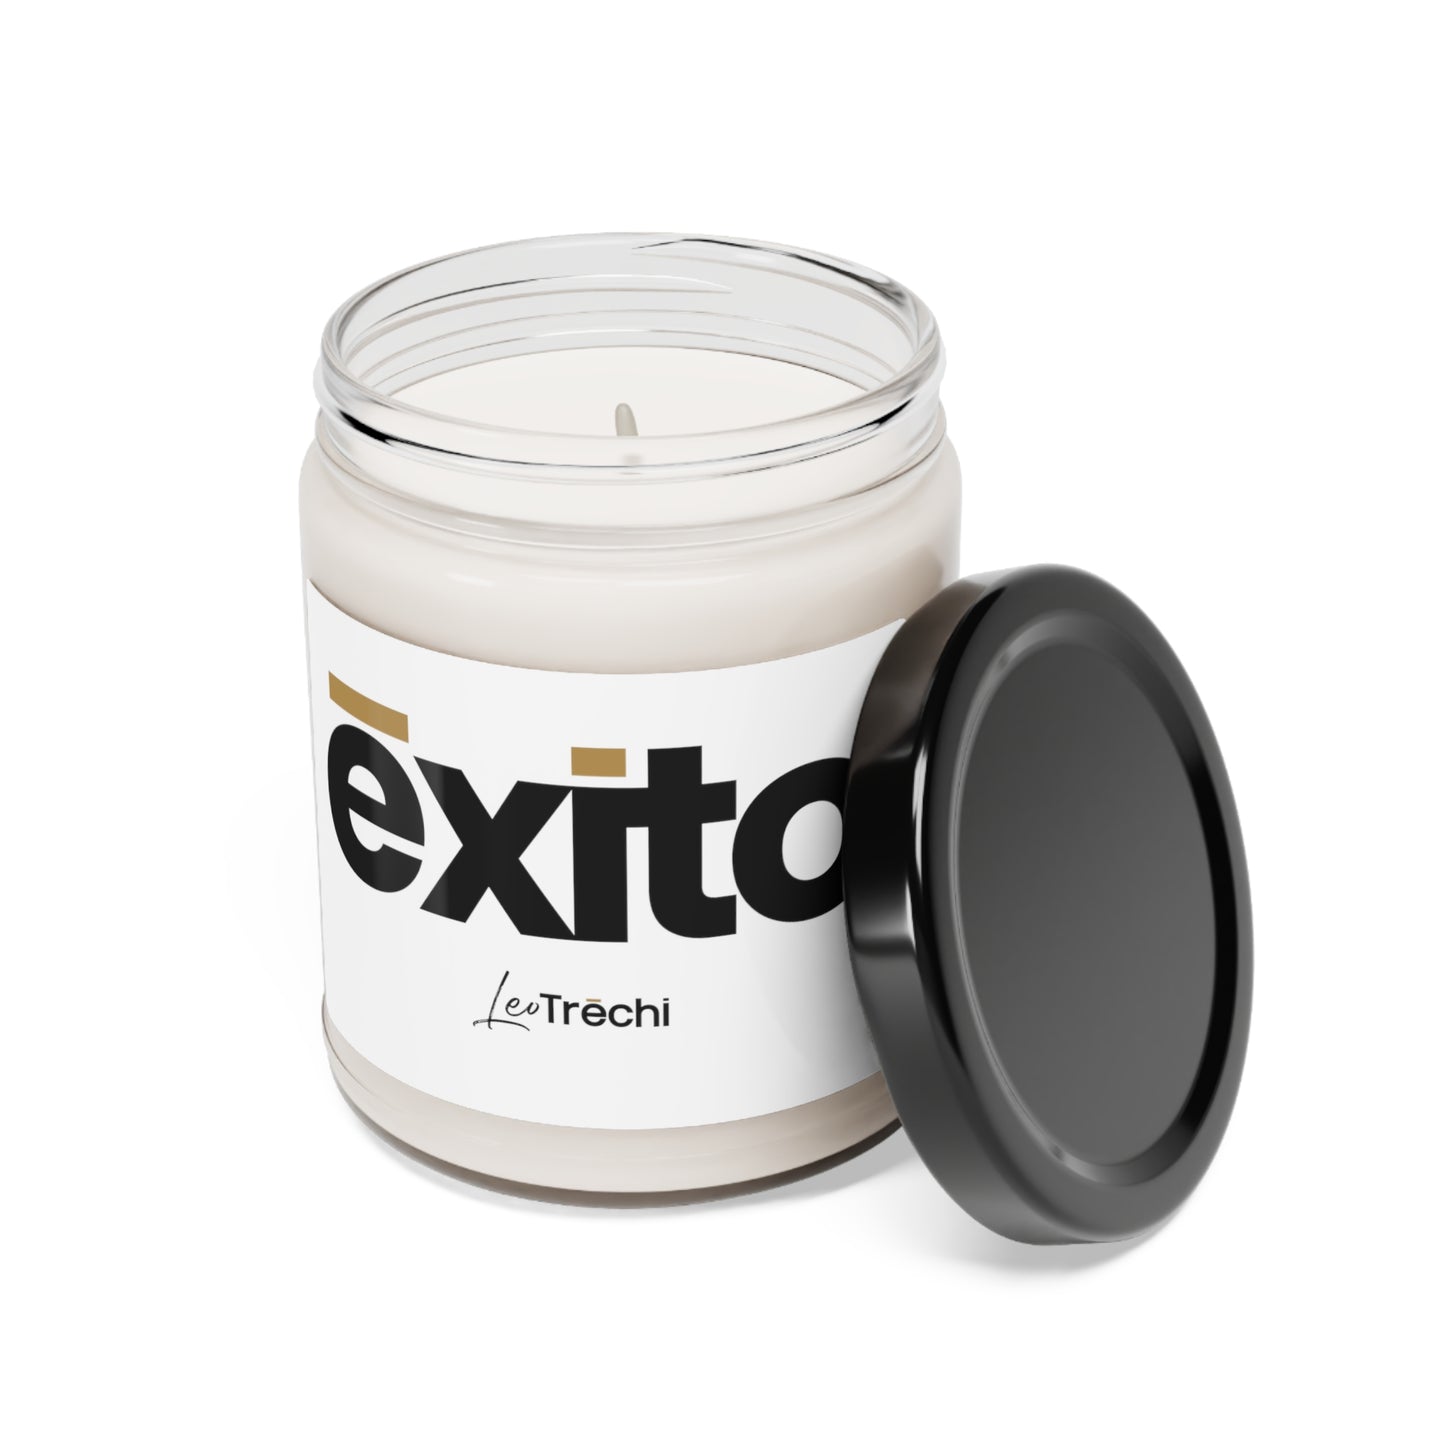 exito - Scented Soy Candle, 9oz